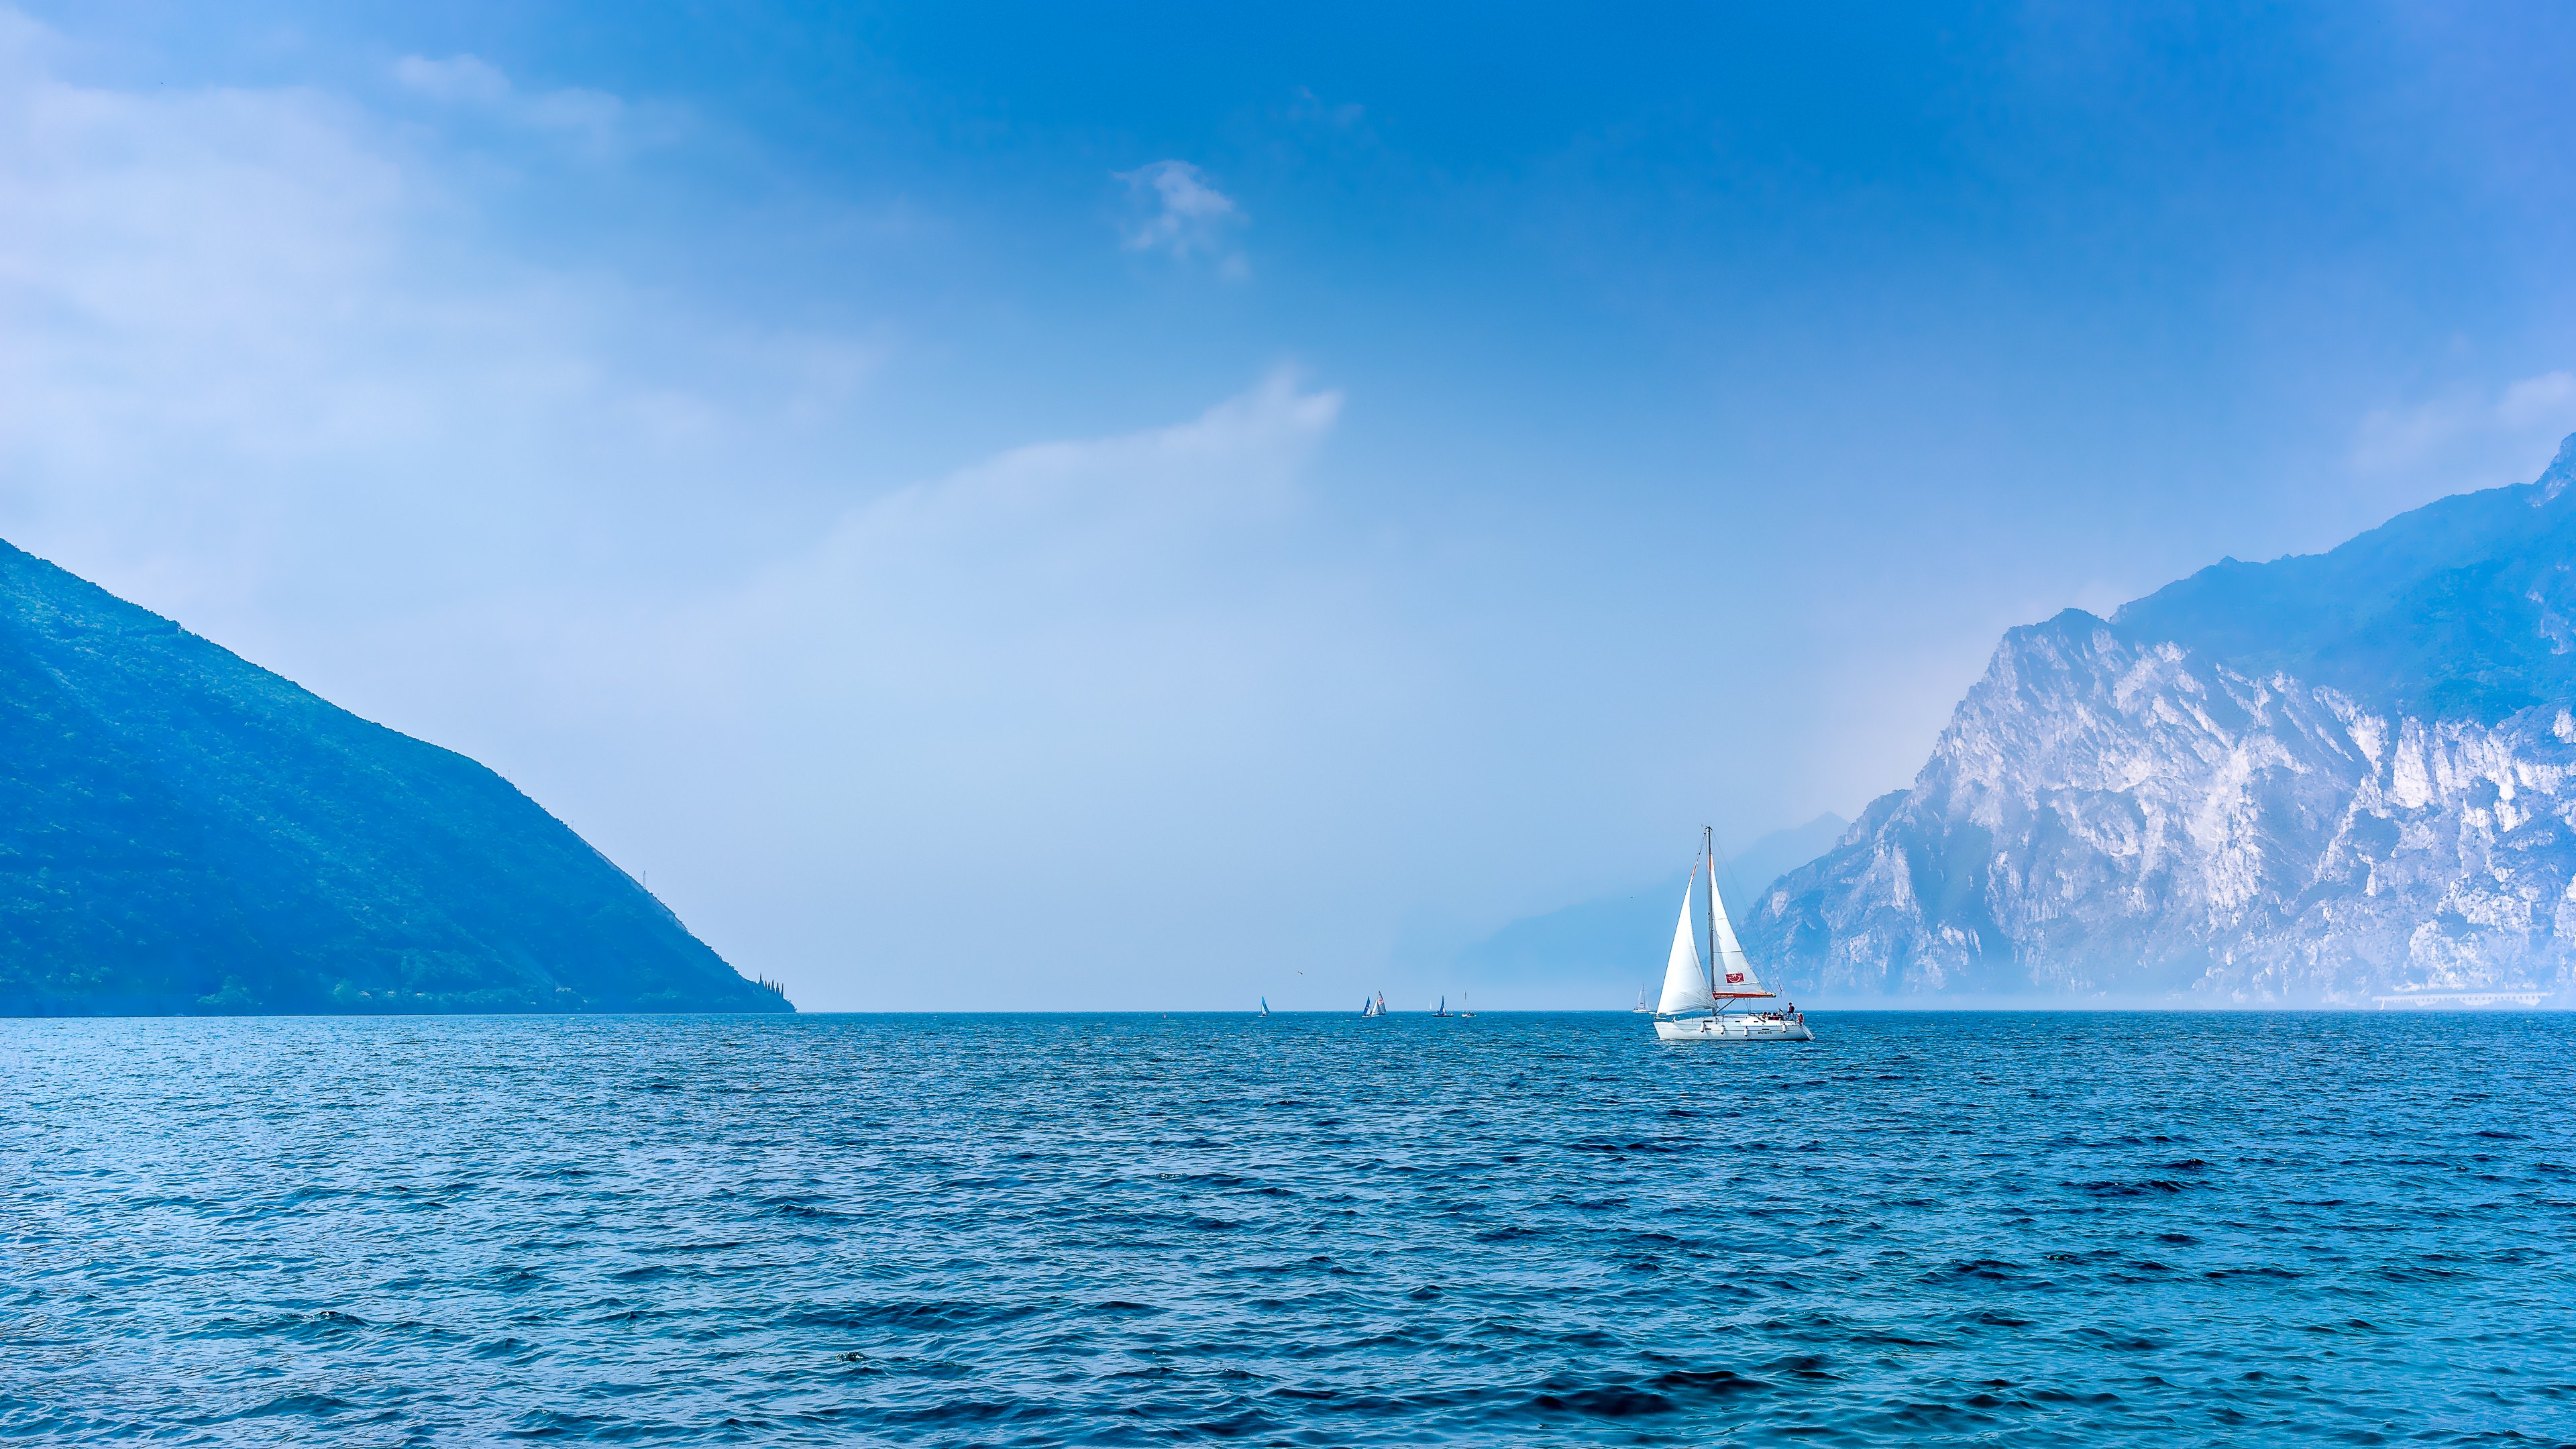 Sailboat Wallpaper Background 59958 3840x2160 px